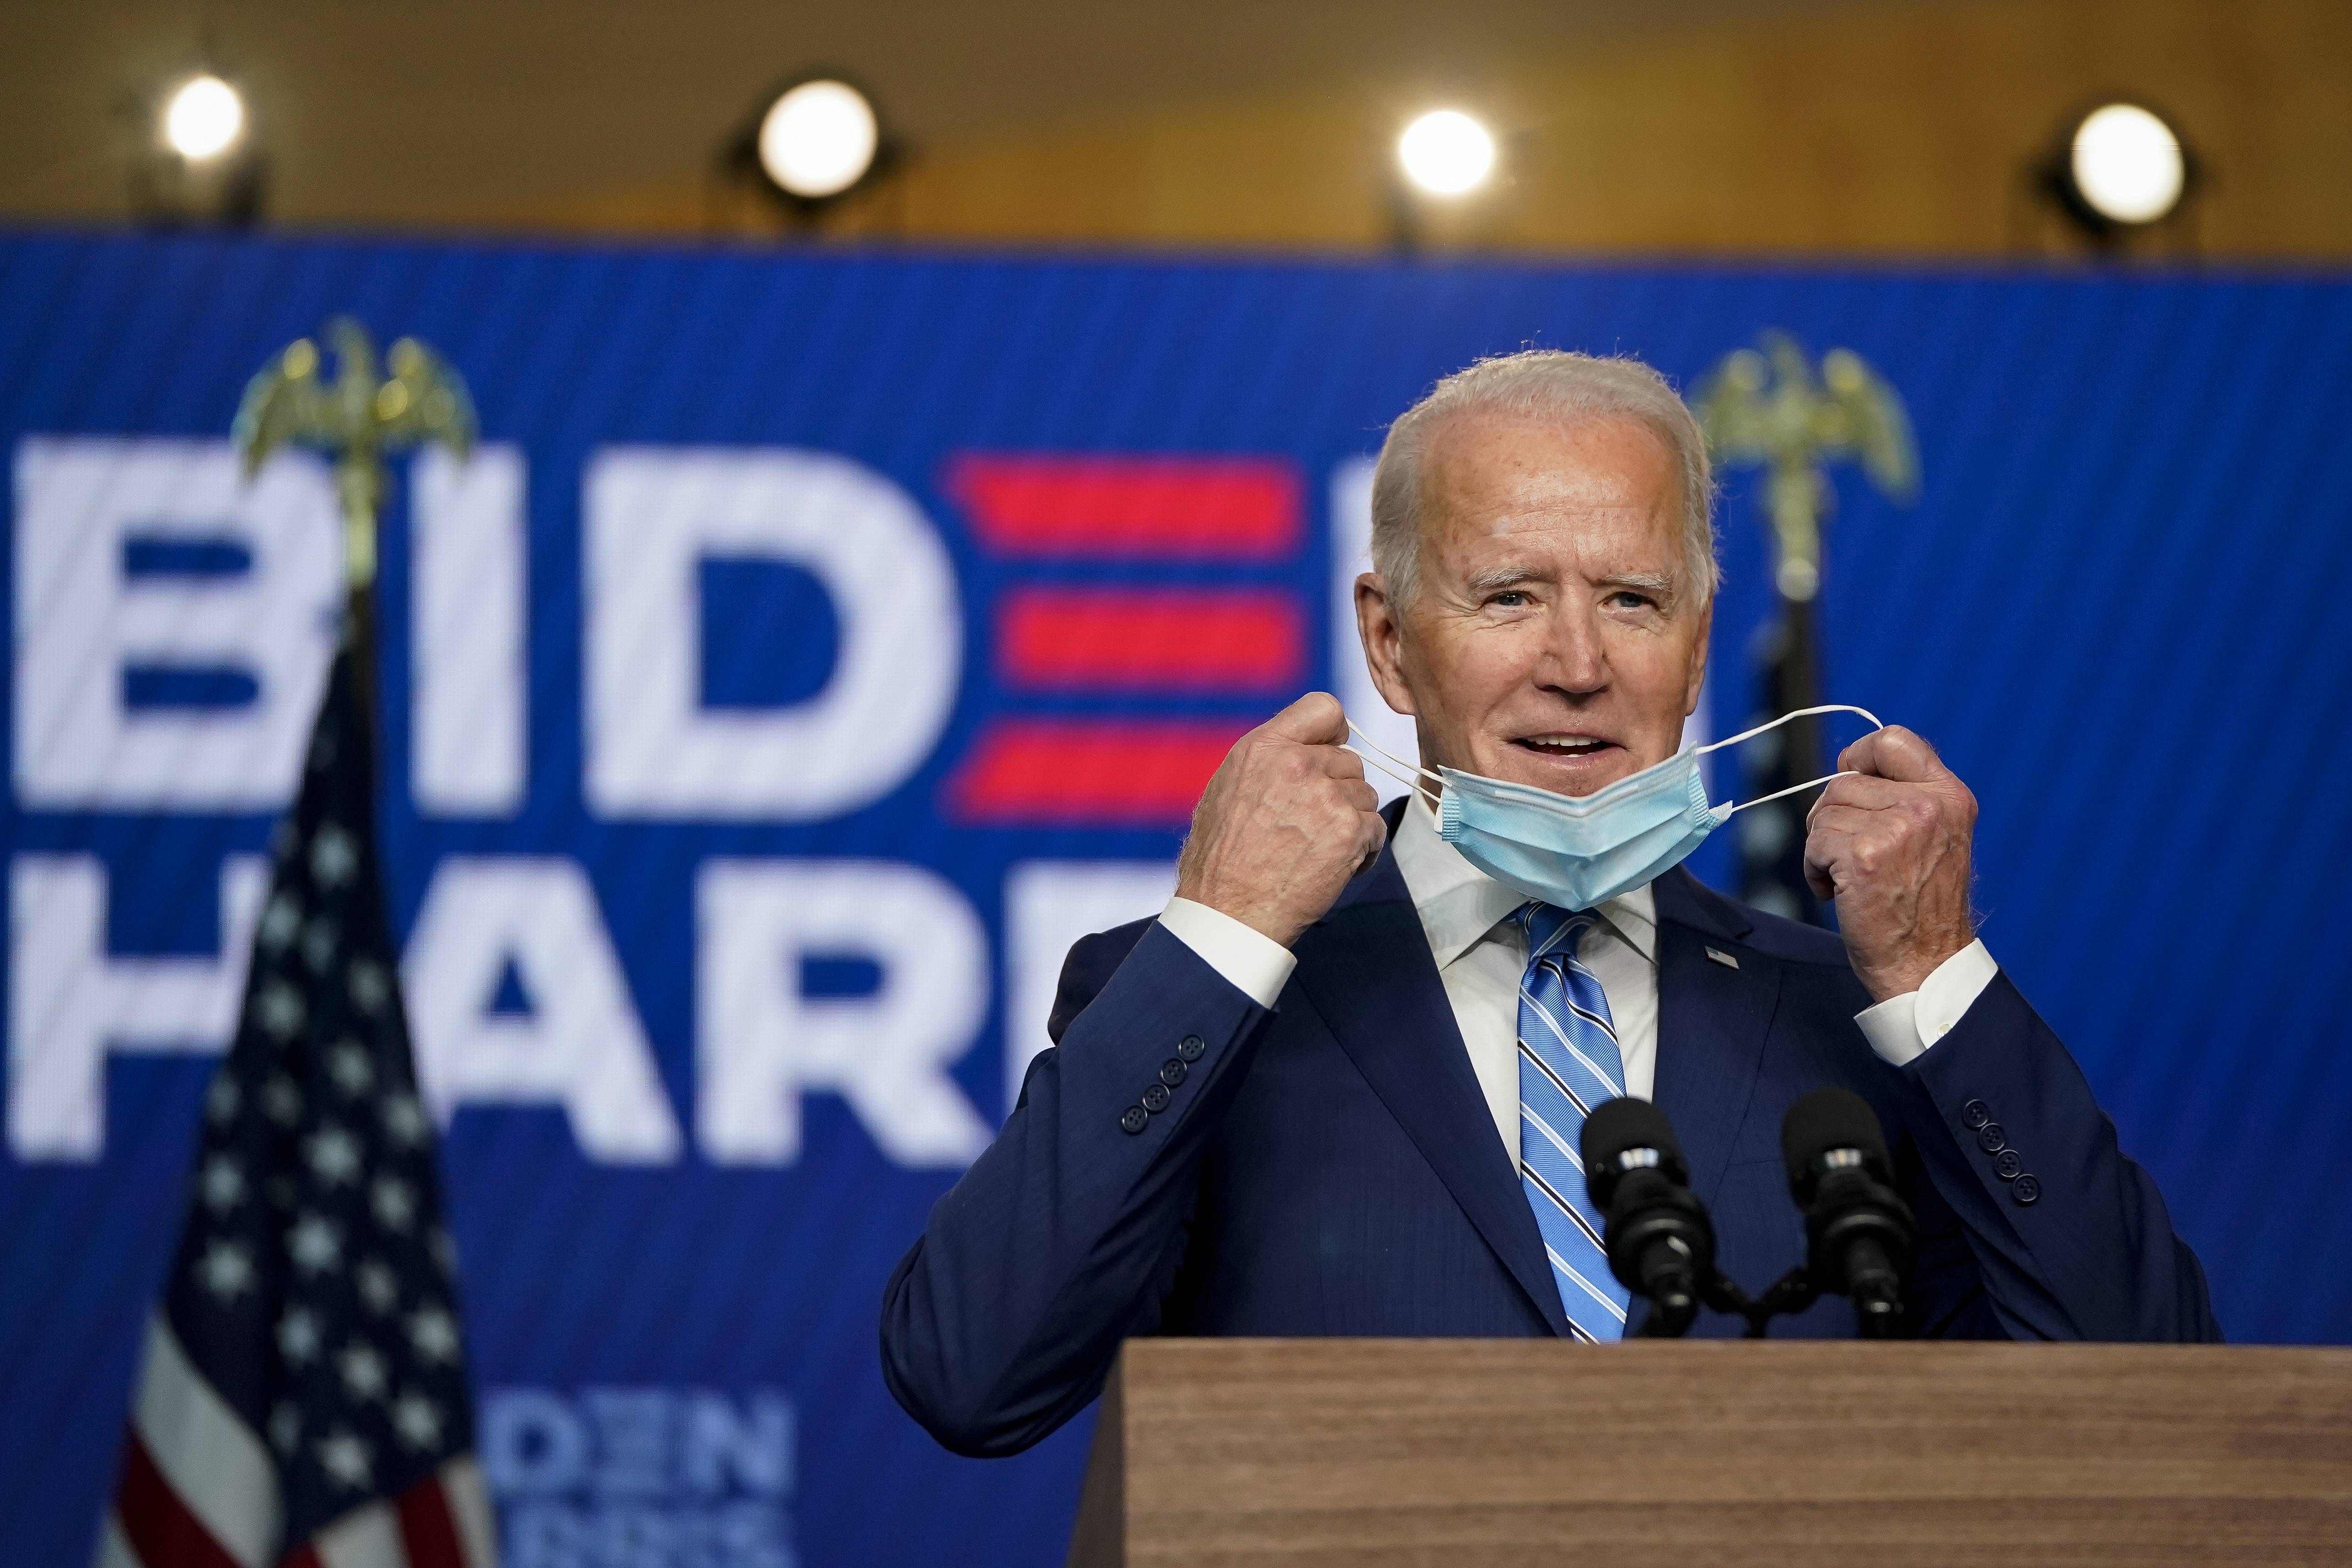 Democratic presidential nominee Joe Biden takes his face mask off as he arrives to speak one day after Americans voted in the presidential election, on November 04, 2020 in Wilmington, Delaware. Biden spoke as votes are still being counted in his tight race against incumbent U.S. President Donald Trump which remains too close to call. Credit: Getty Images/AFP